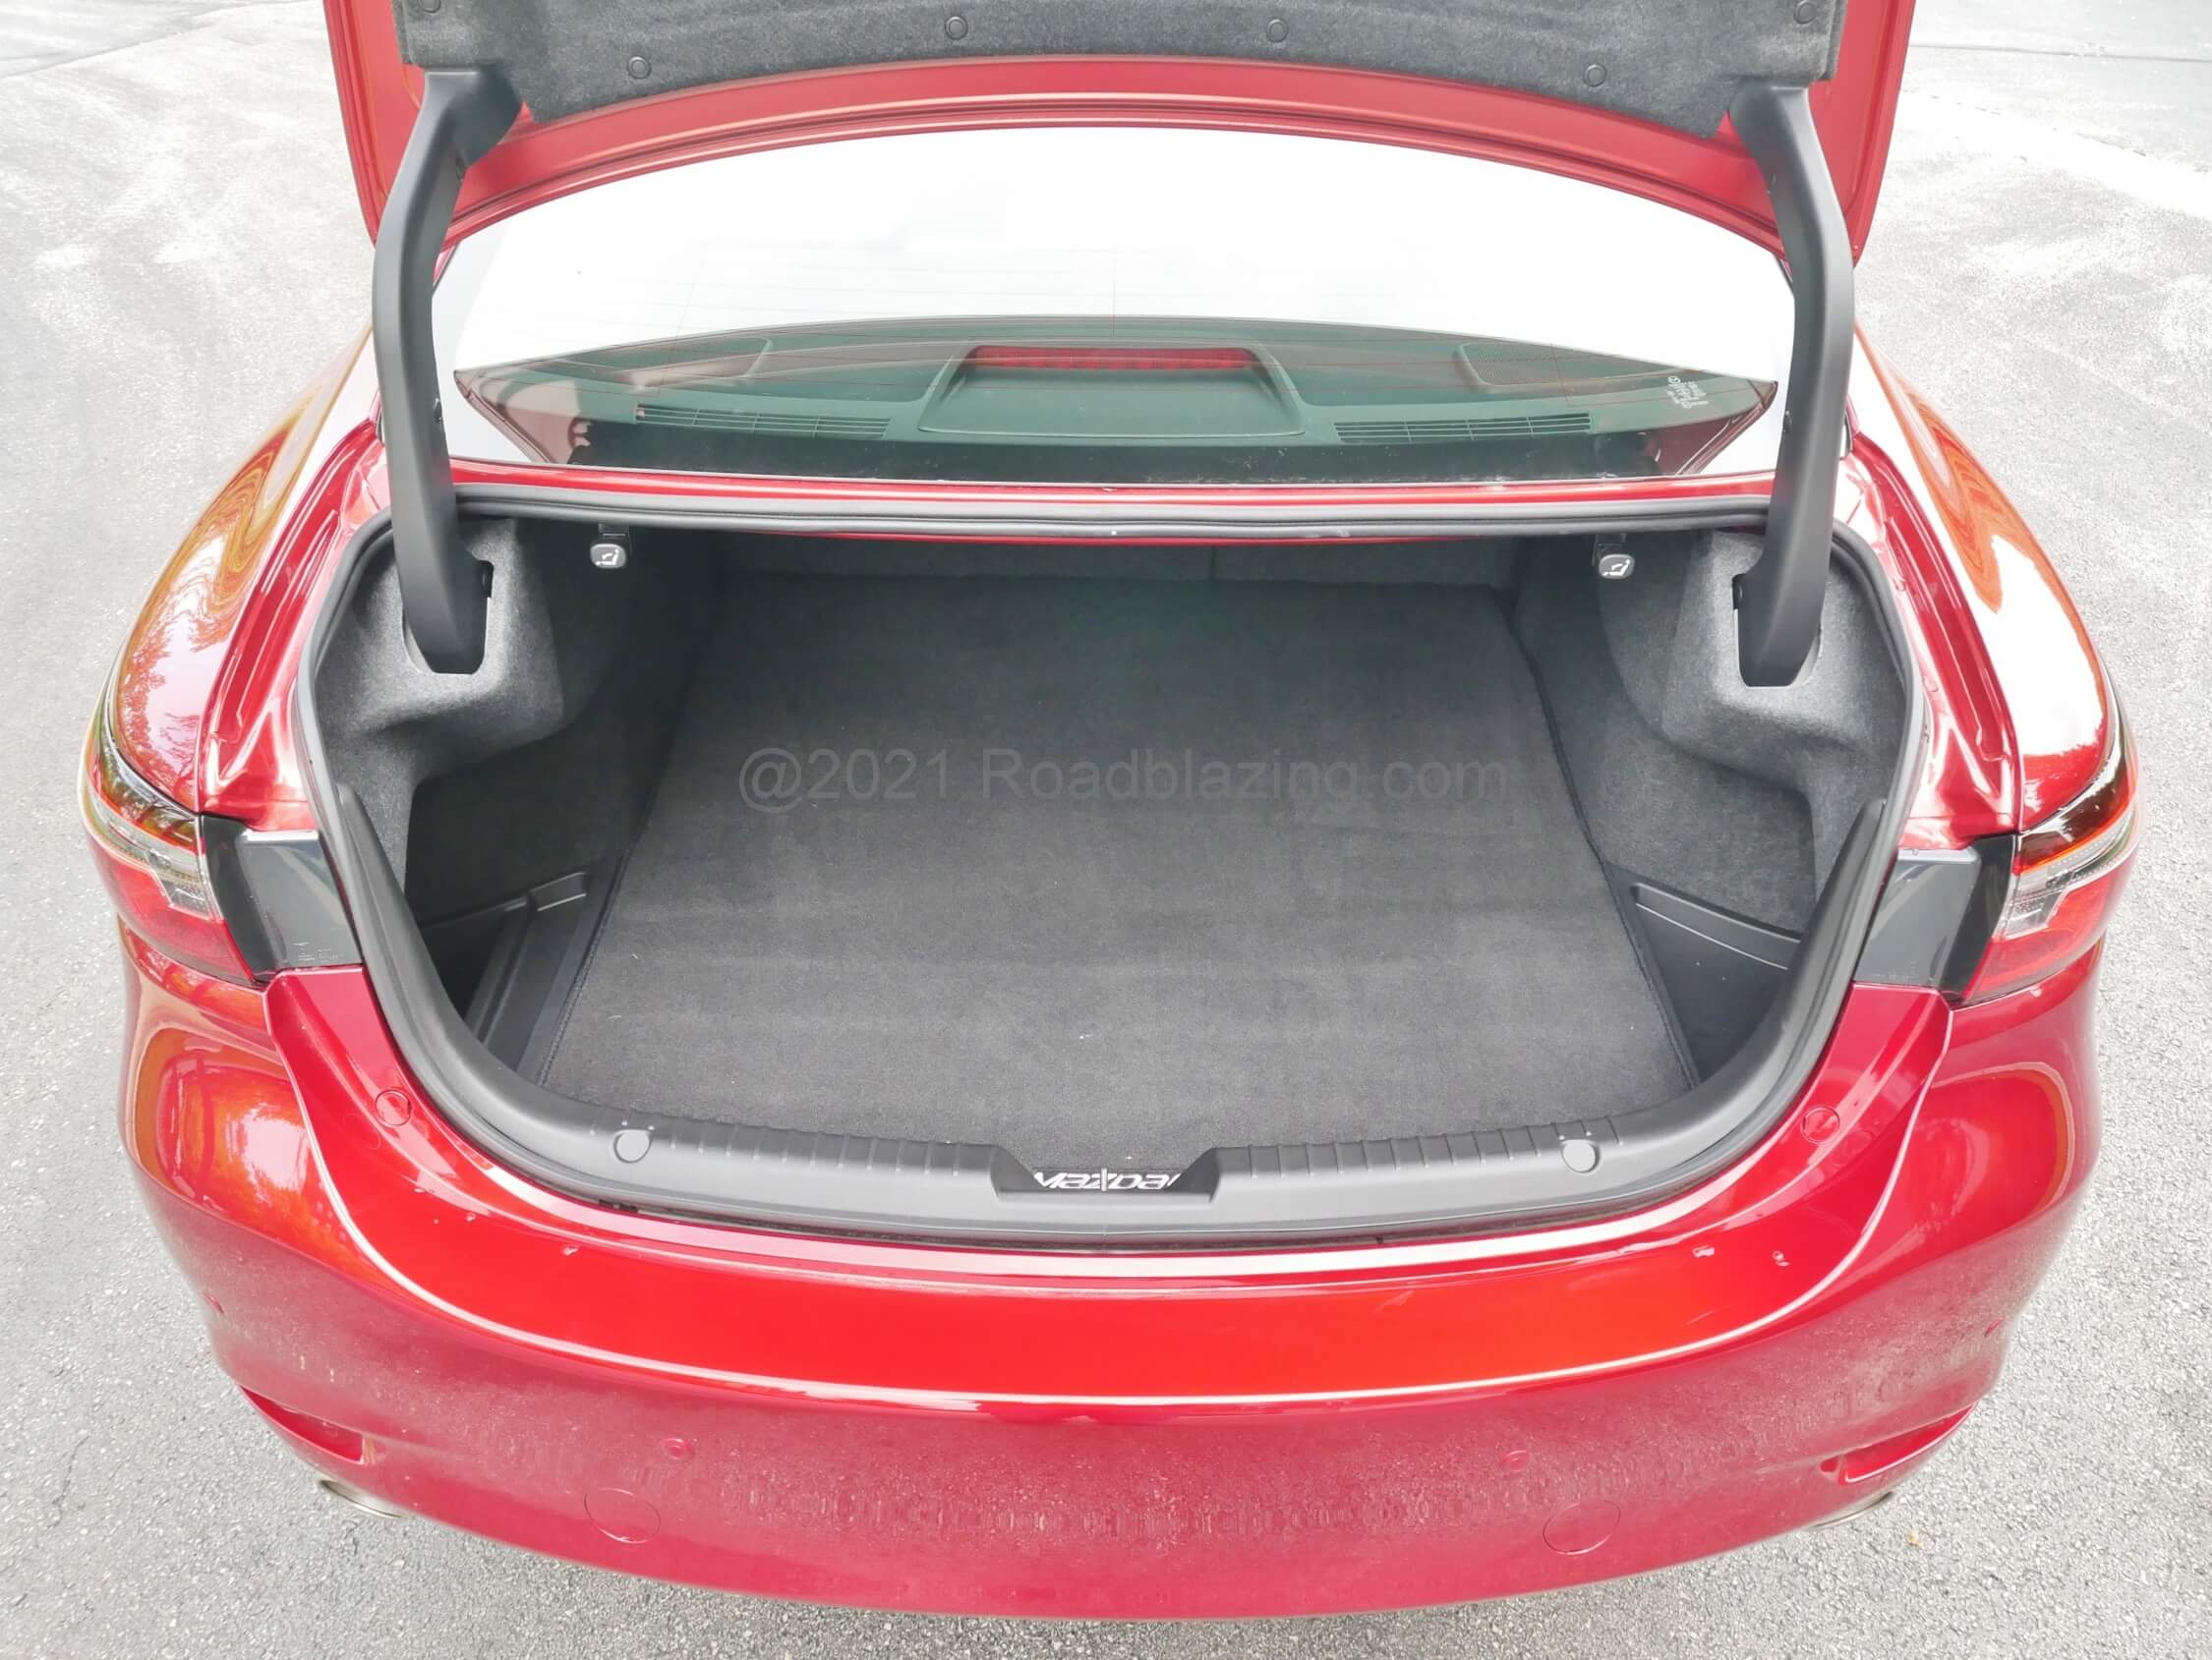 2021 Mazda 6 Signature 2.5T: Nicely carpeted trunk for extra sound insulation